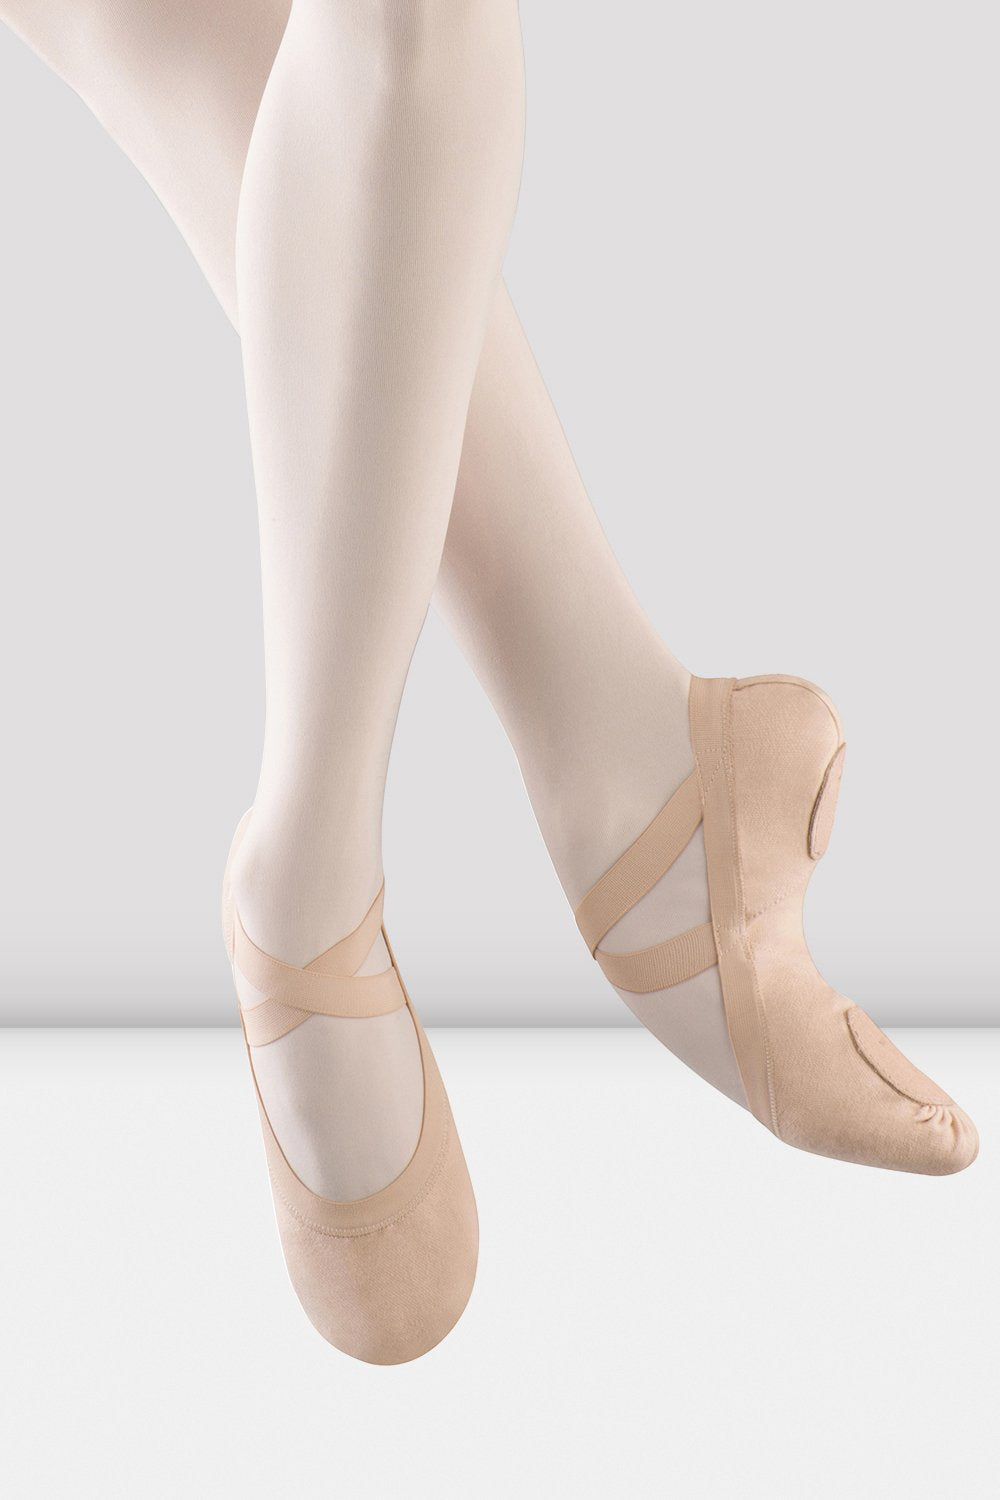 Body Wrappers - Split Sole totalSTRETCH Canvas Ballet Shoes